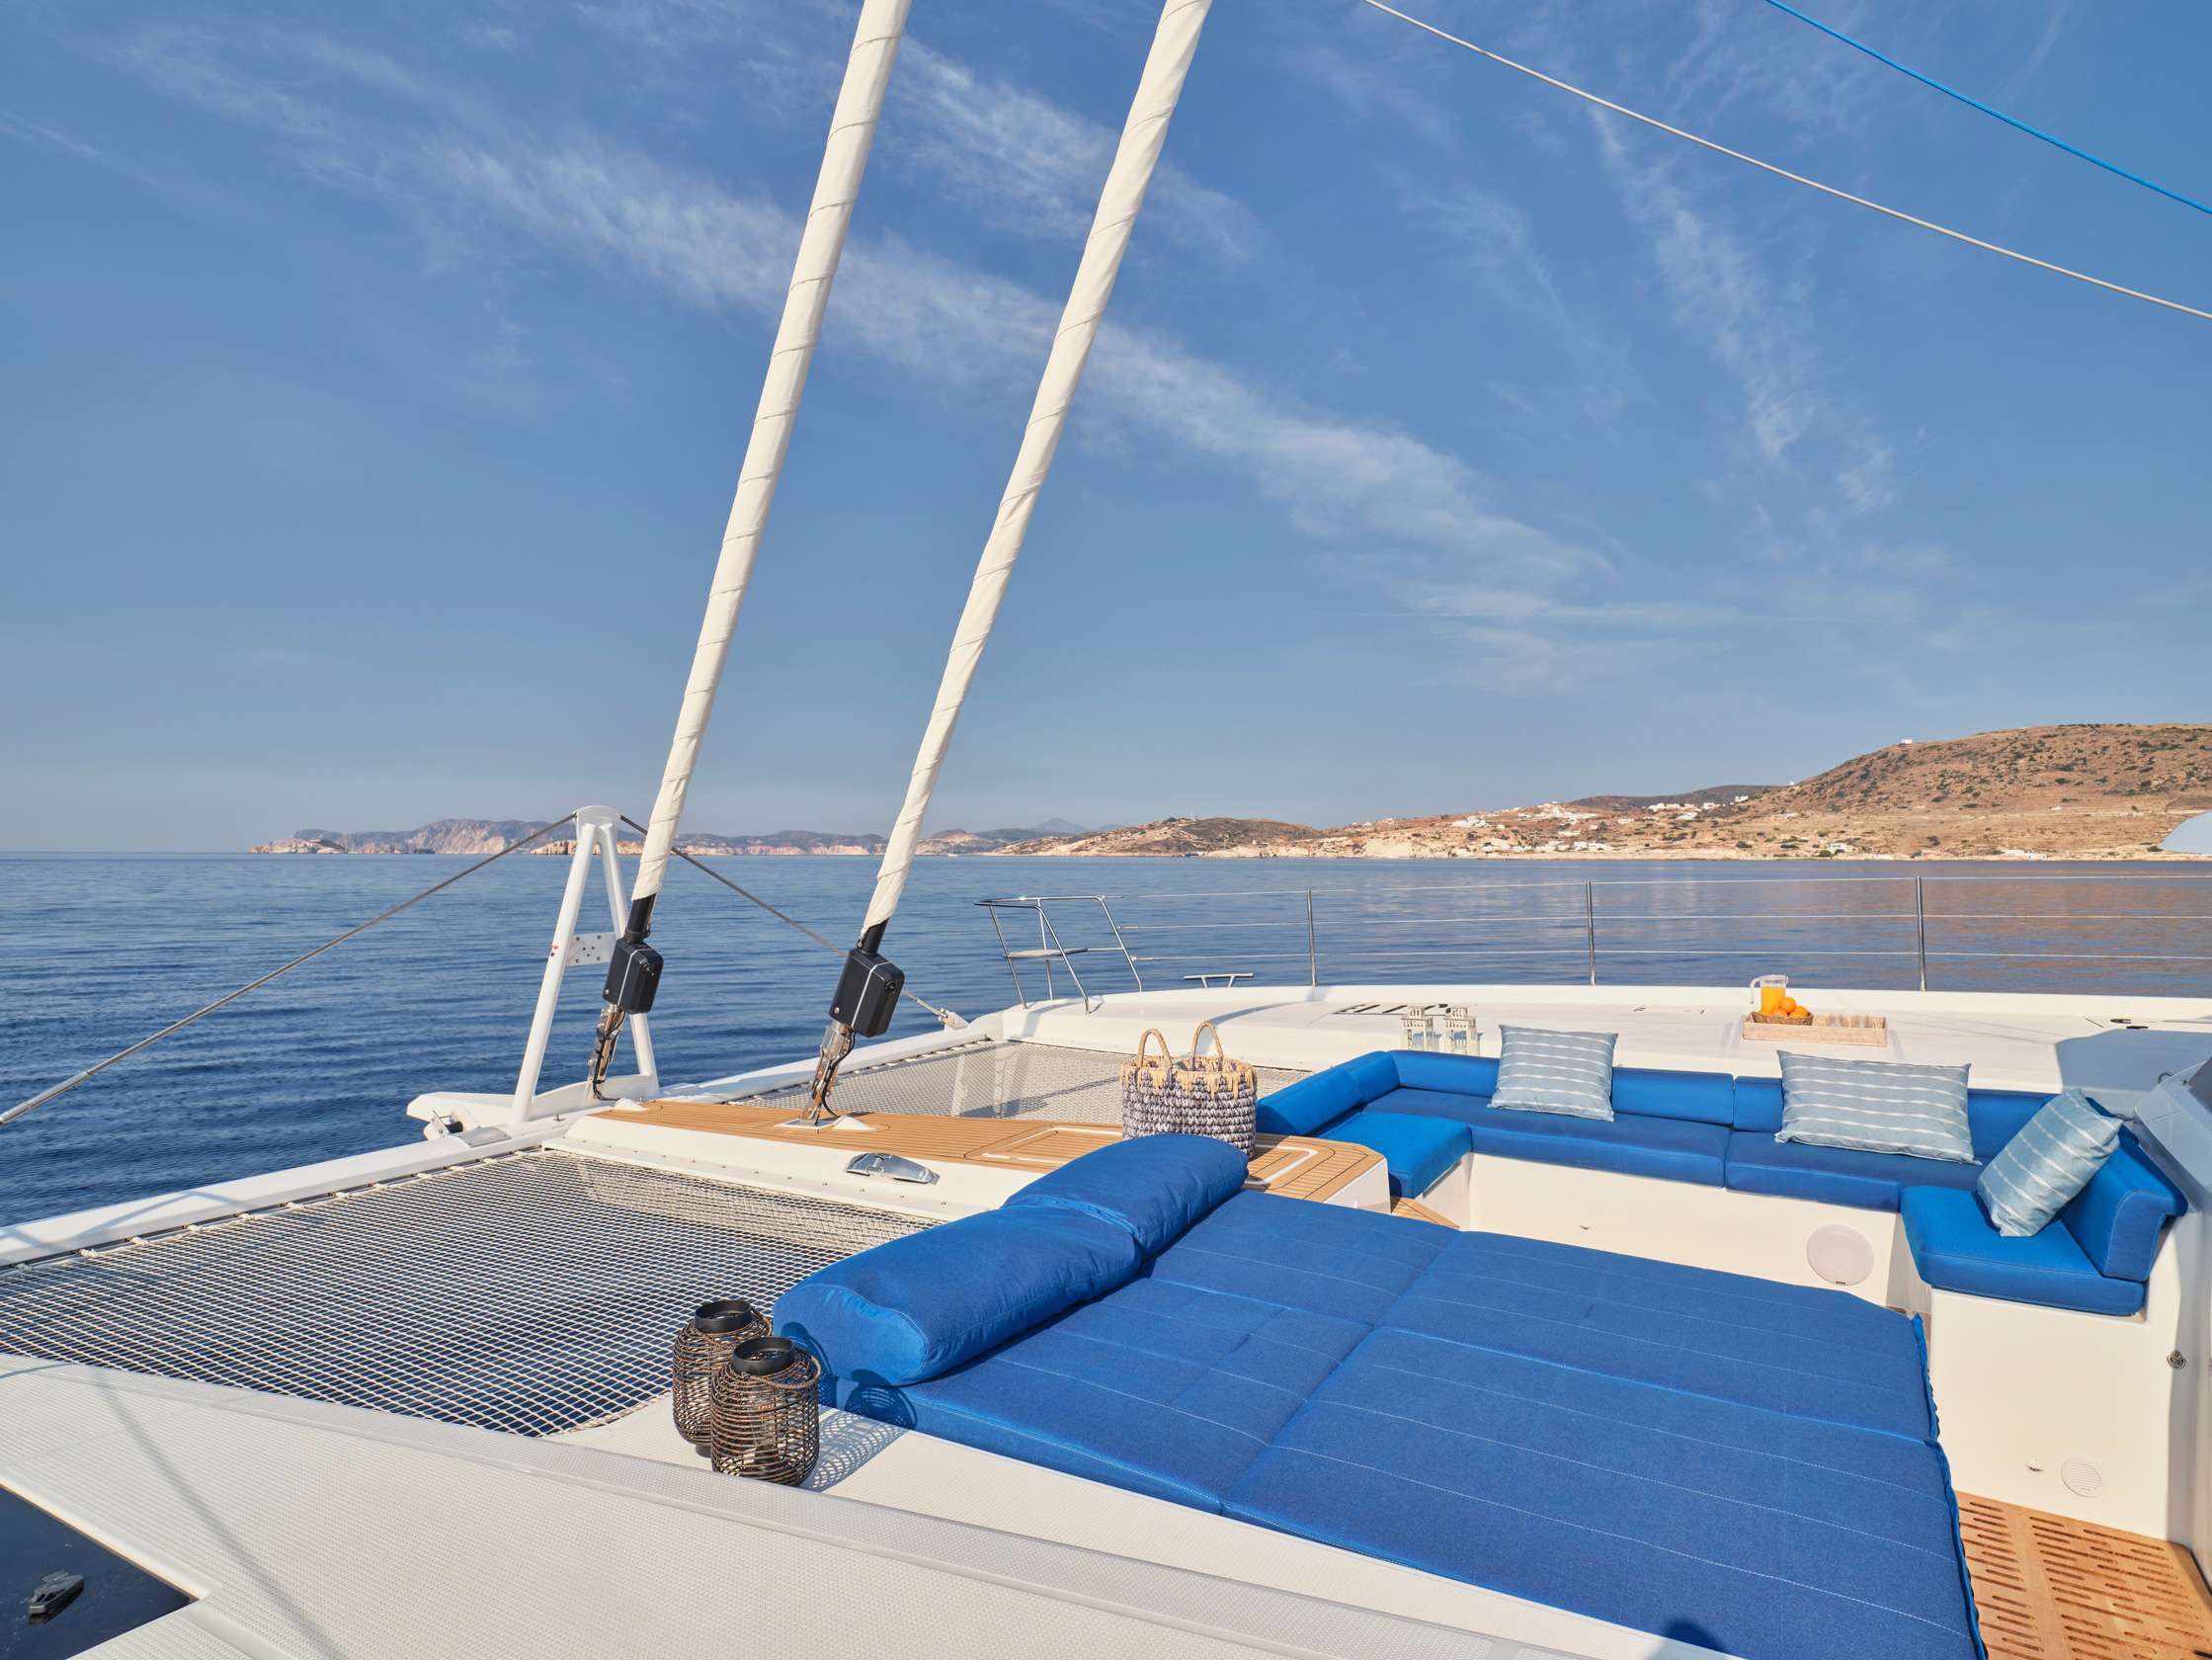 APHAEA Yacht Charter - Foredeck seating area and tanning beds